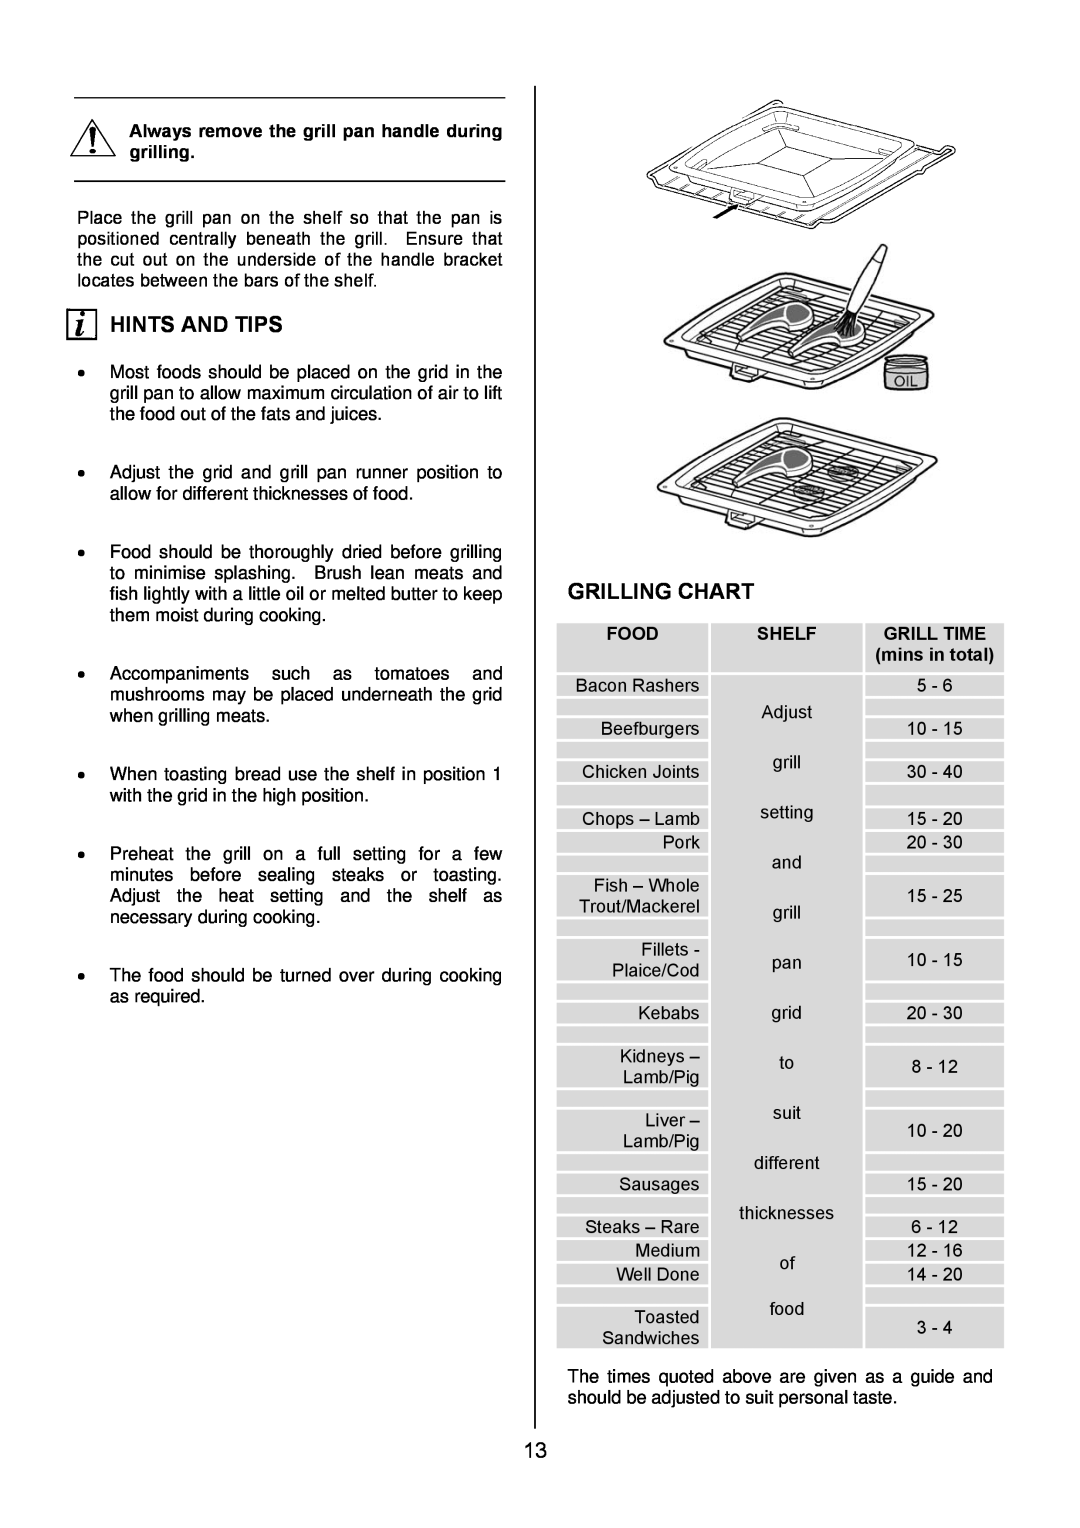 Electrolux EIKG6046 Grilling Chart, Hints And Tips, Always remove the grill pan handle during grilling, Food, Shelf 